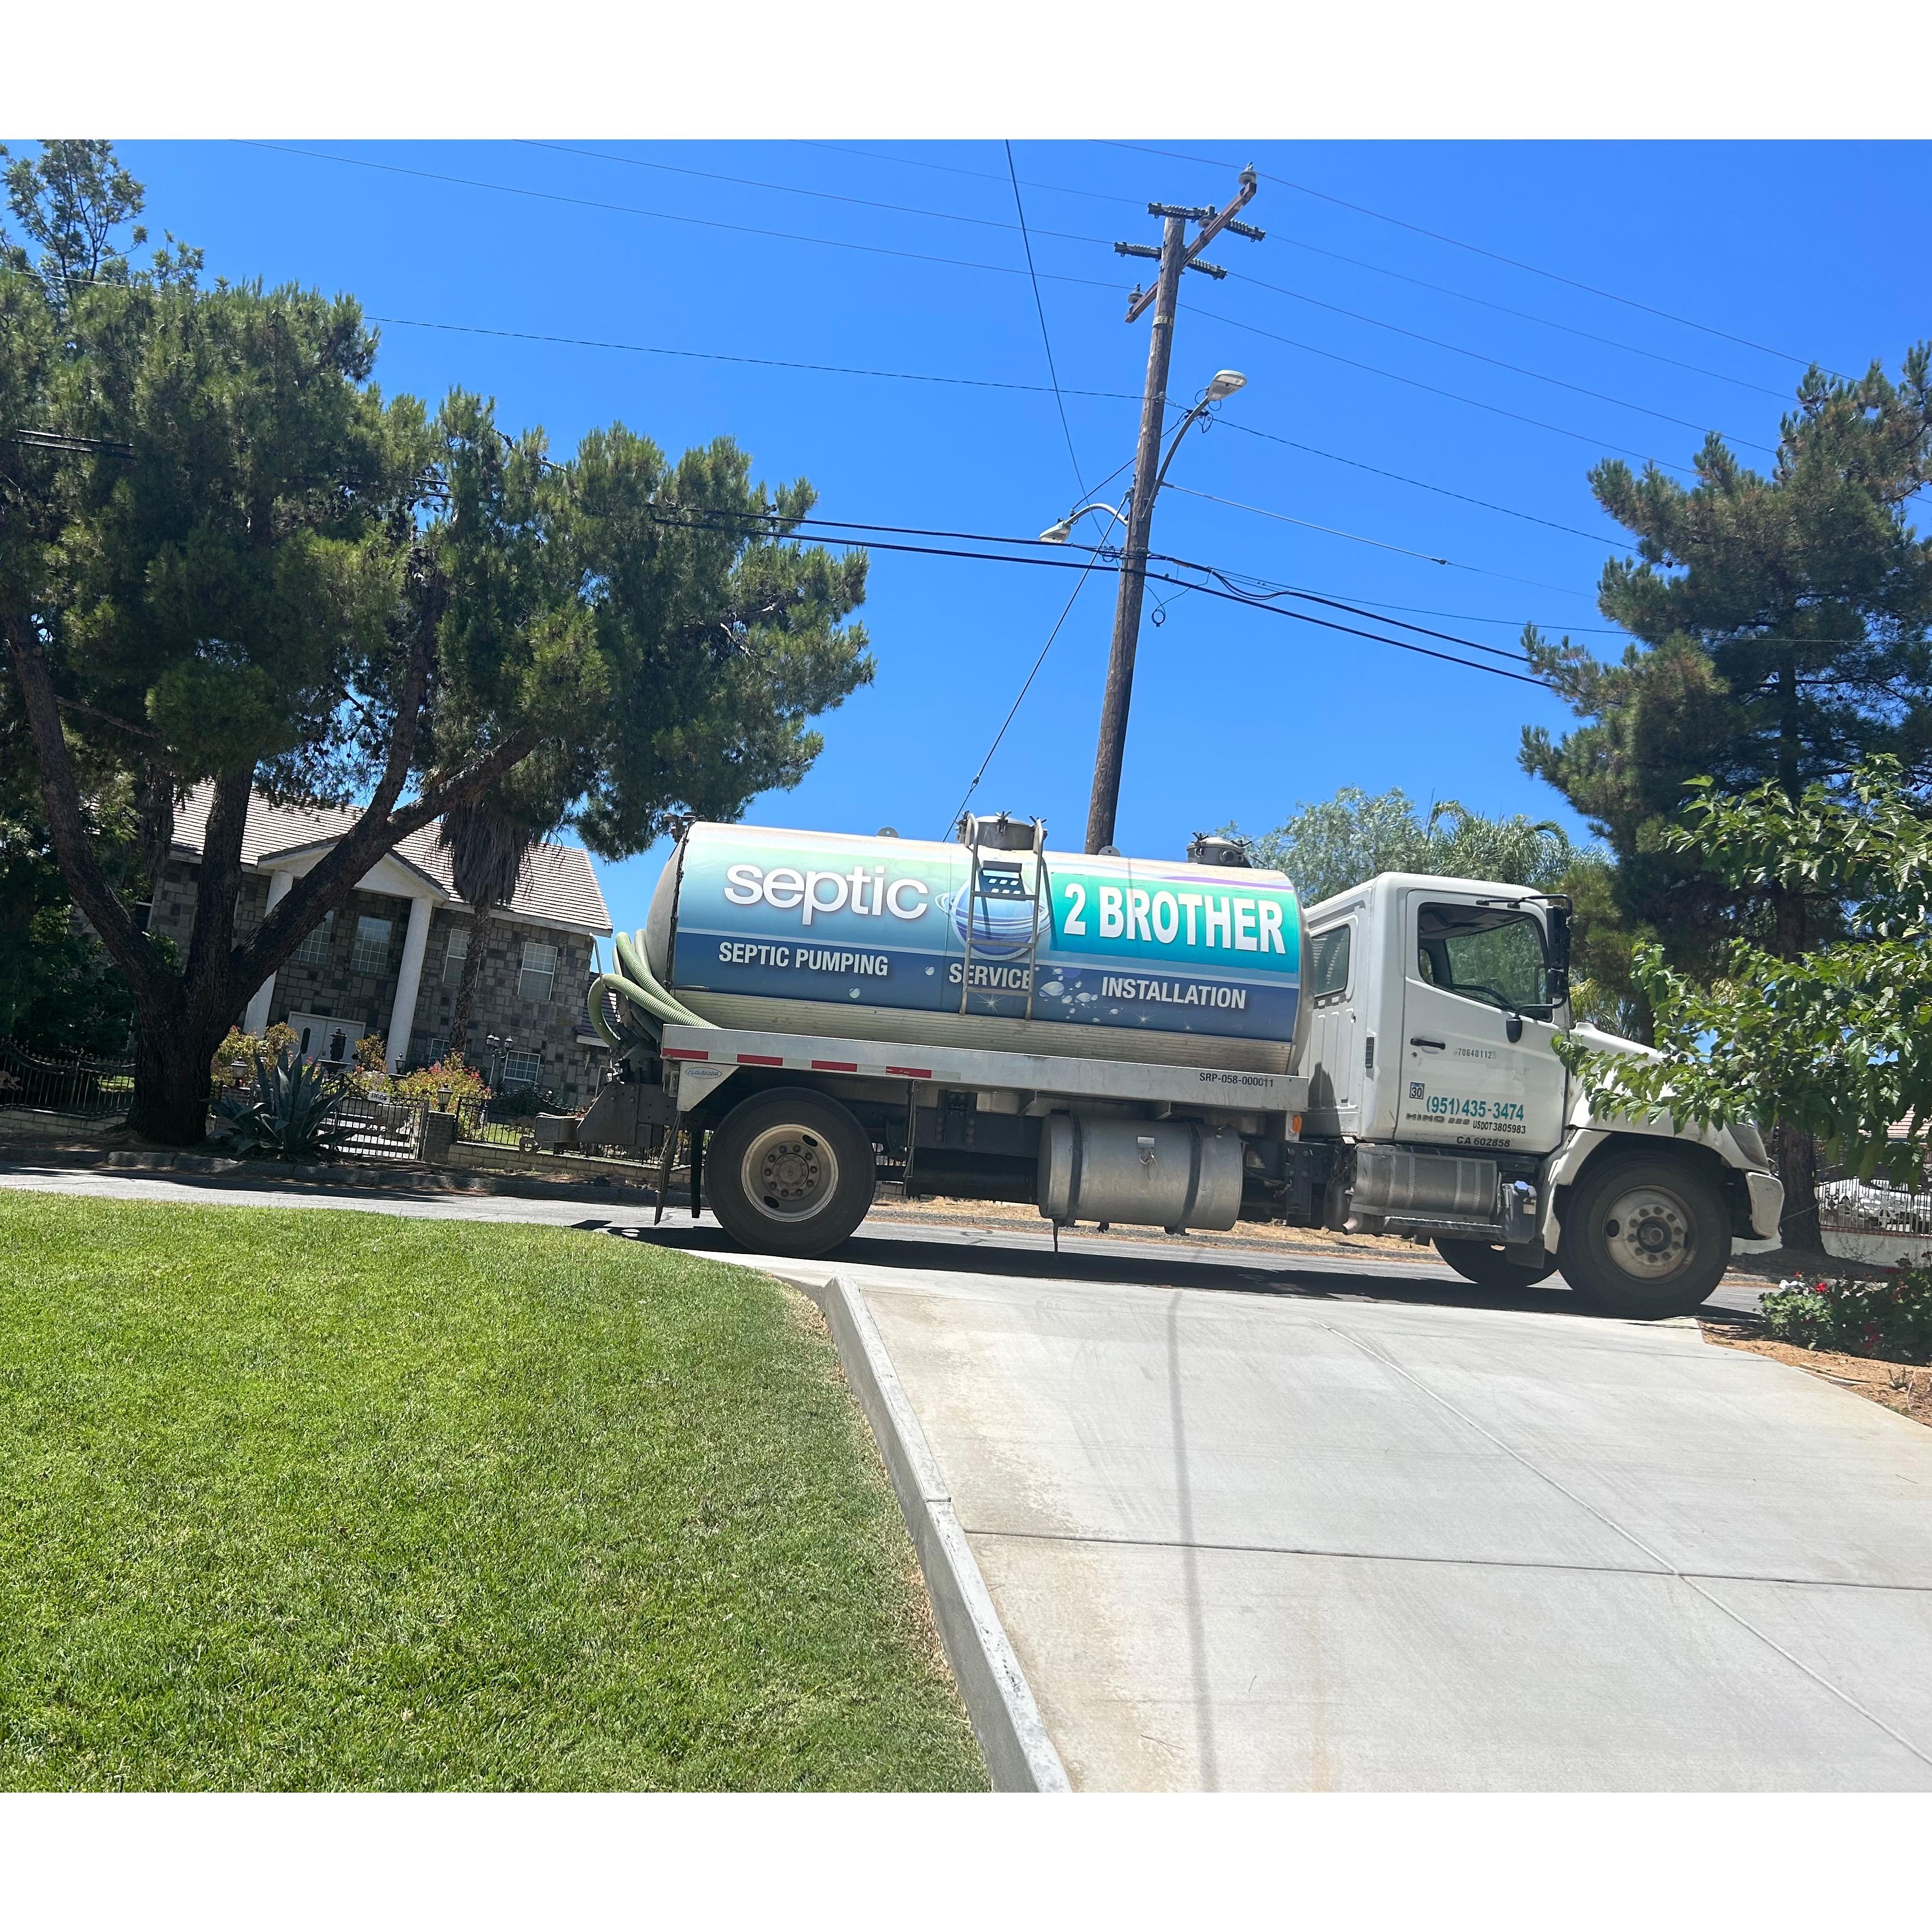 2brother septic tank service & pumping